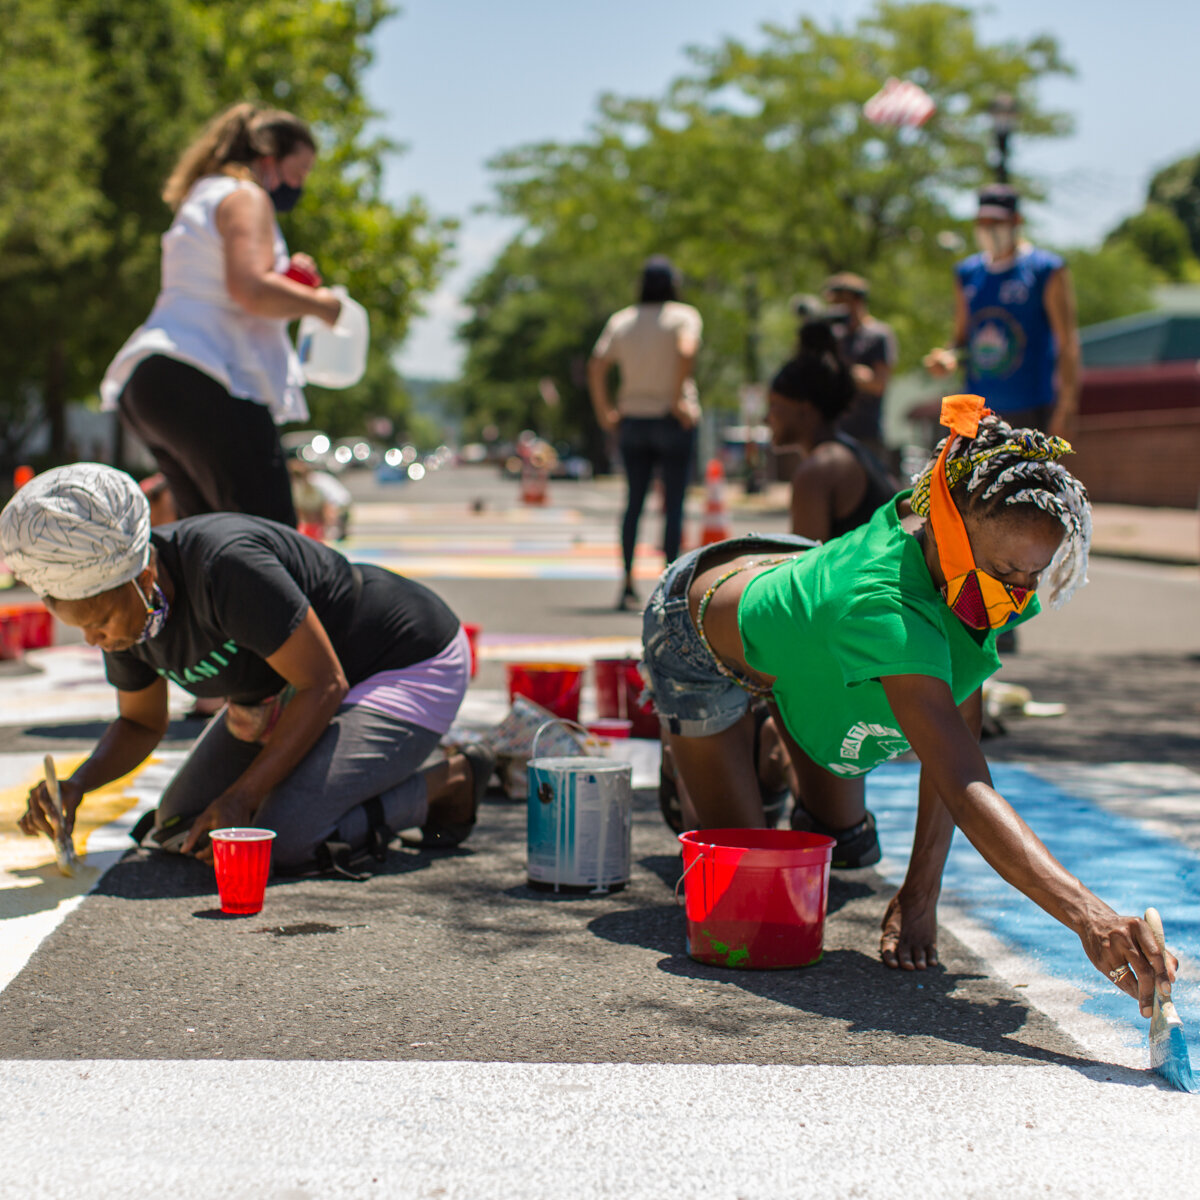 Black Lives Matter Street Painting Is Rejected in Catskill, N.Y. - The New  York Times